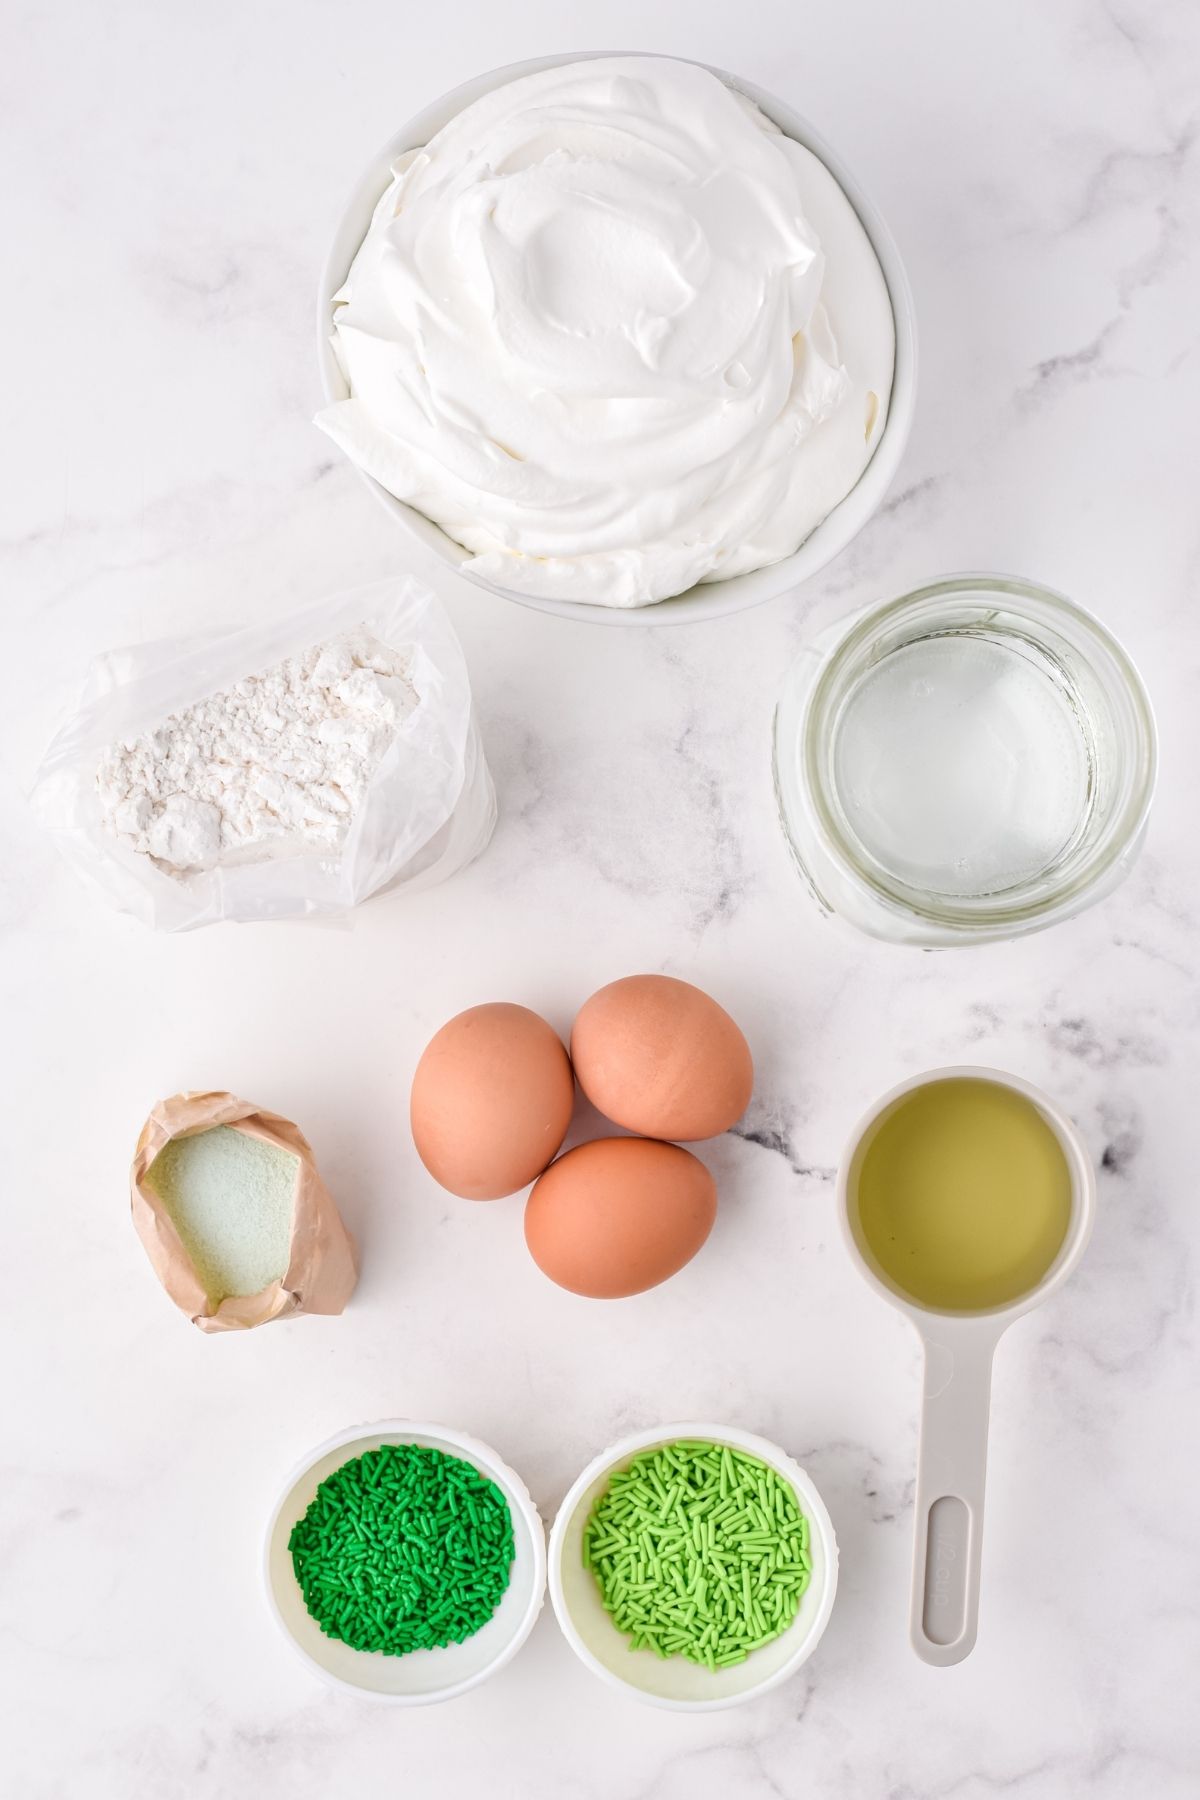 ingredients on white counter: whipped topping, water, oil, eggs, cake mix, jello, green sprinkles